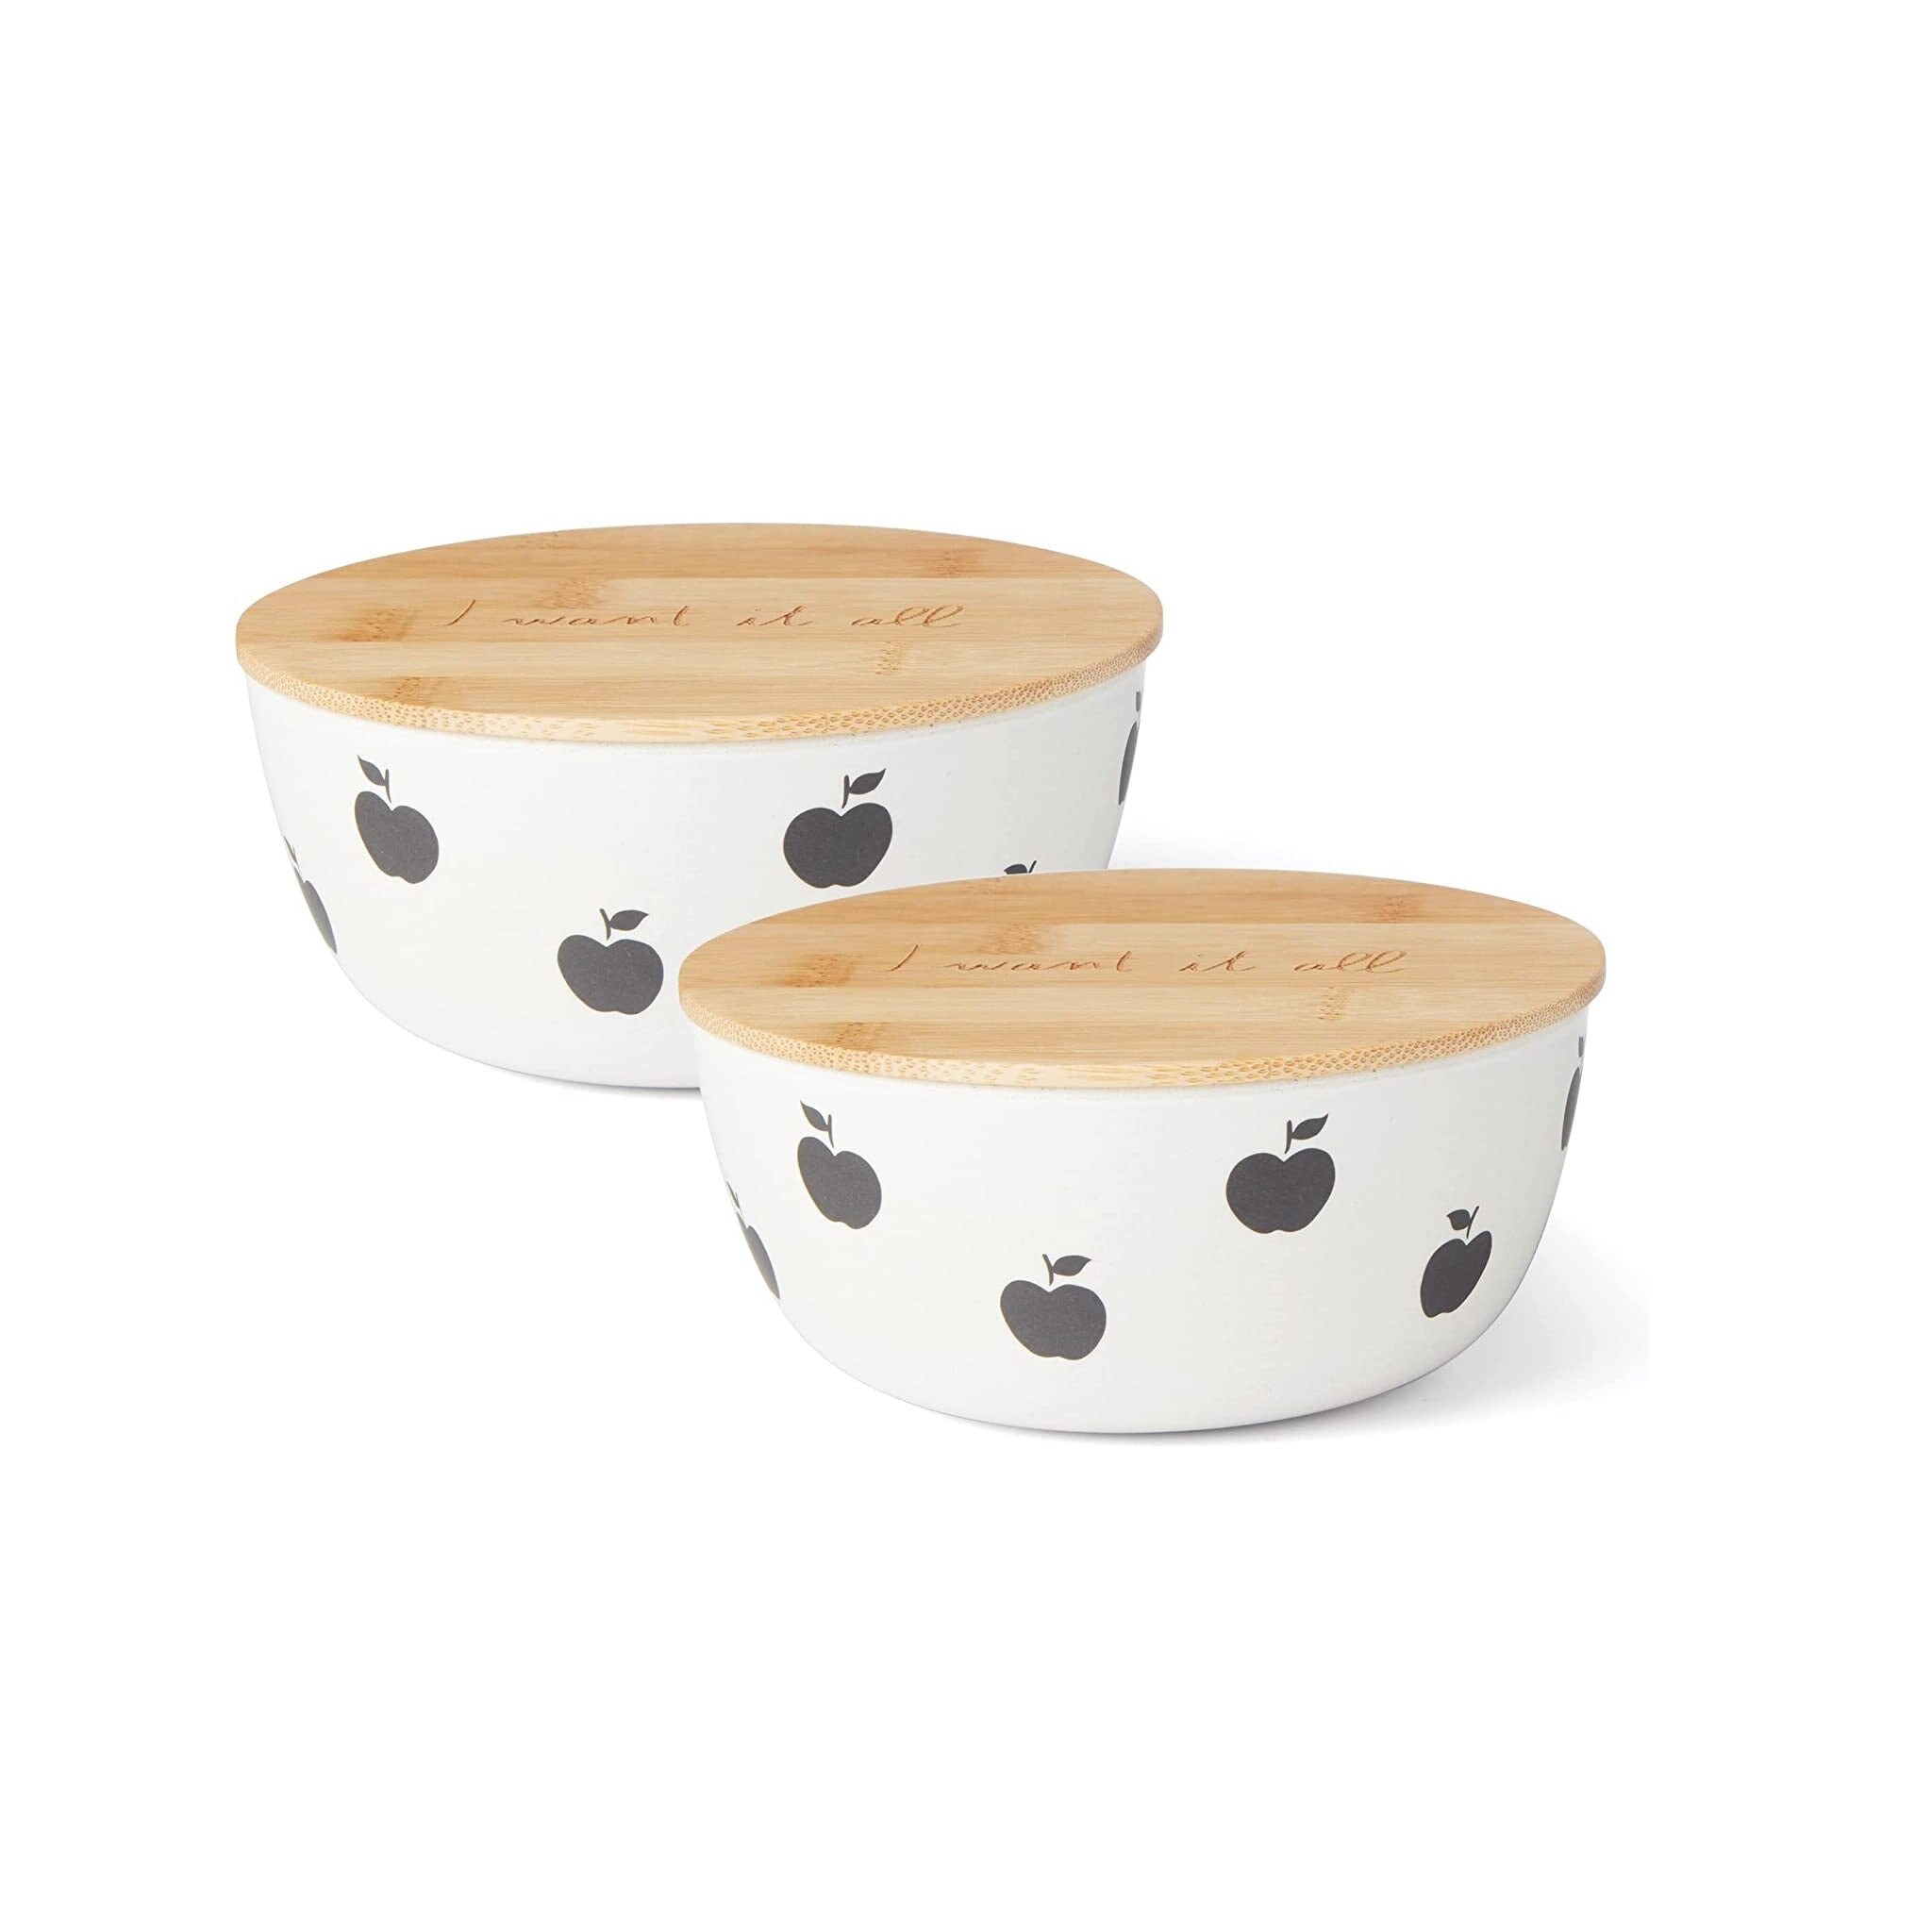 Kate Spade New York Apple Toss Lunch Set of 2 by Lenox - Etsy Singapore